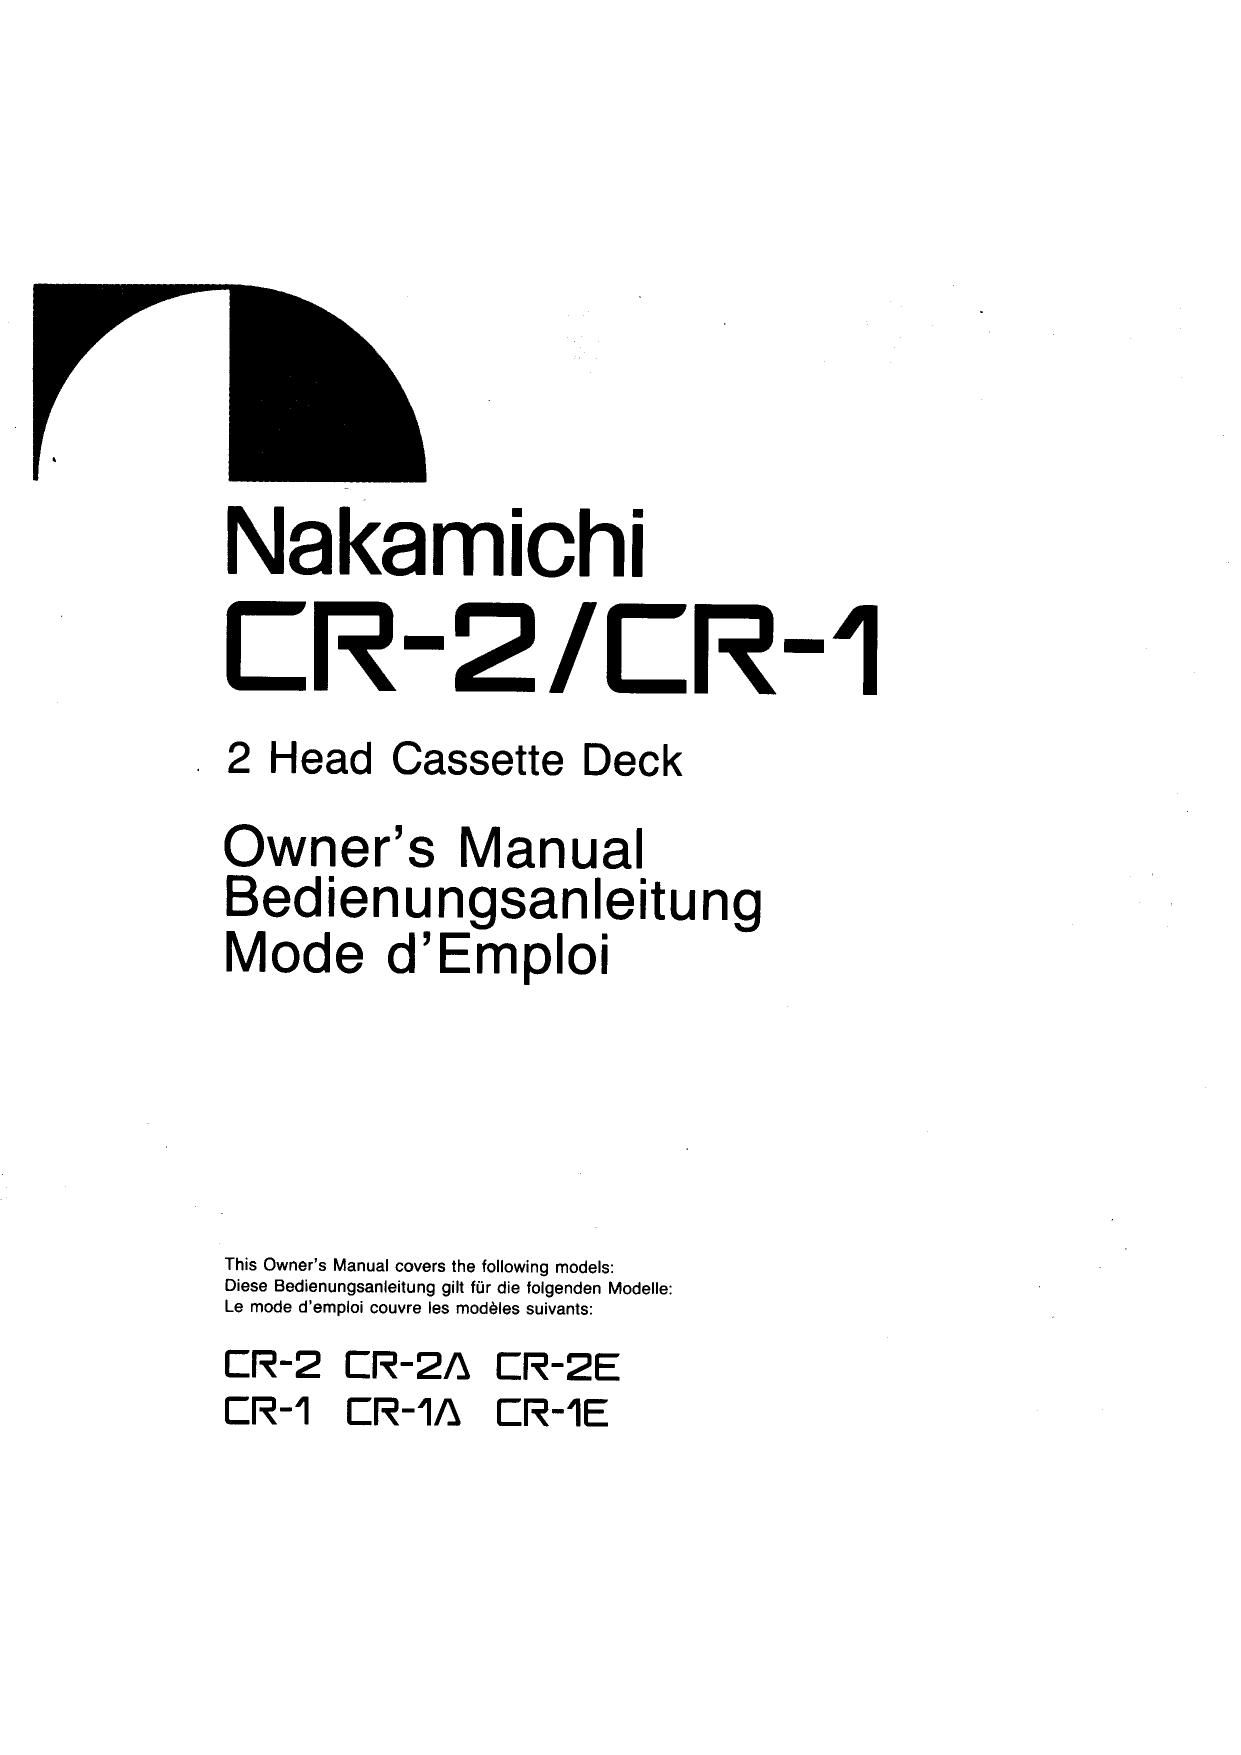 Nakamichi CR 2 A Owners Manual